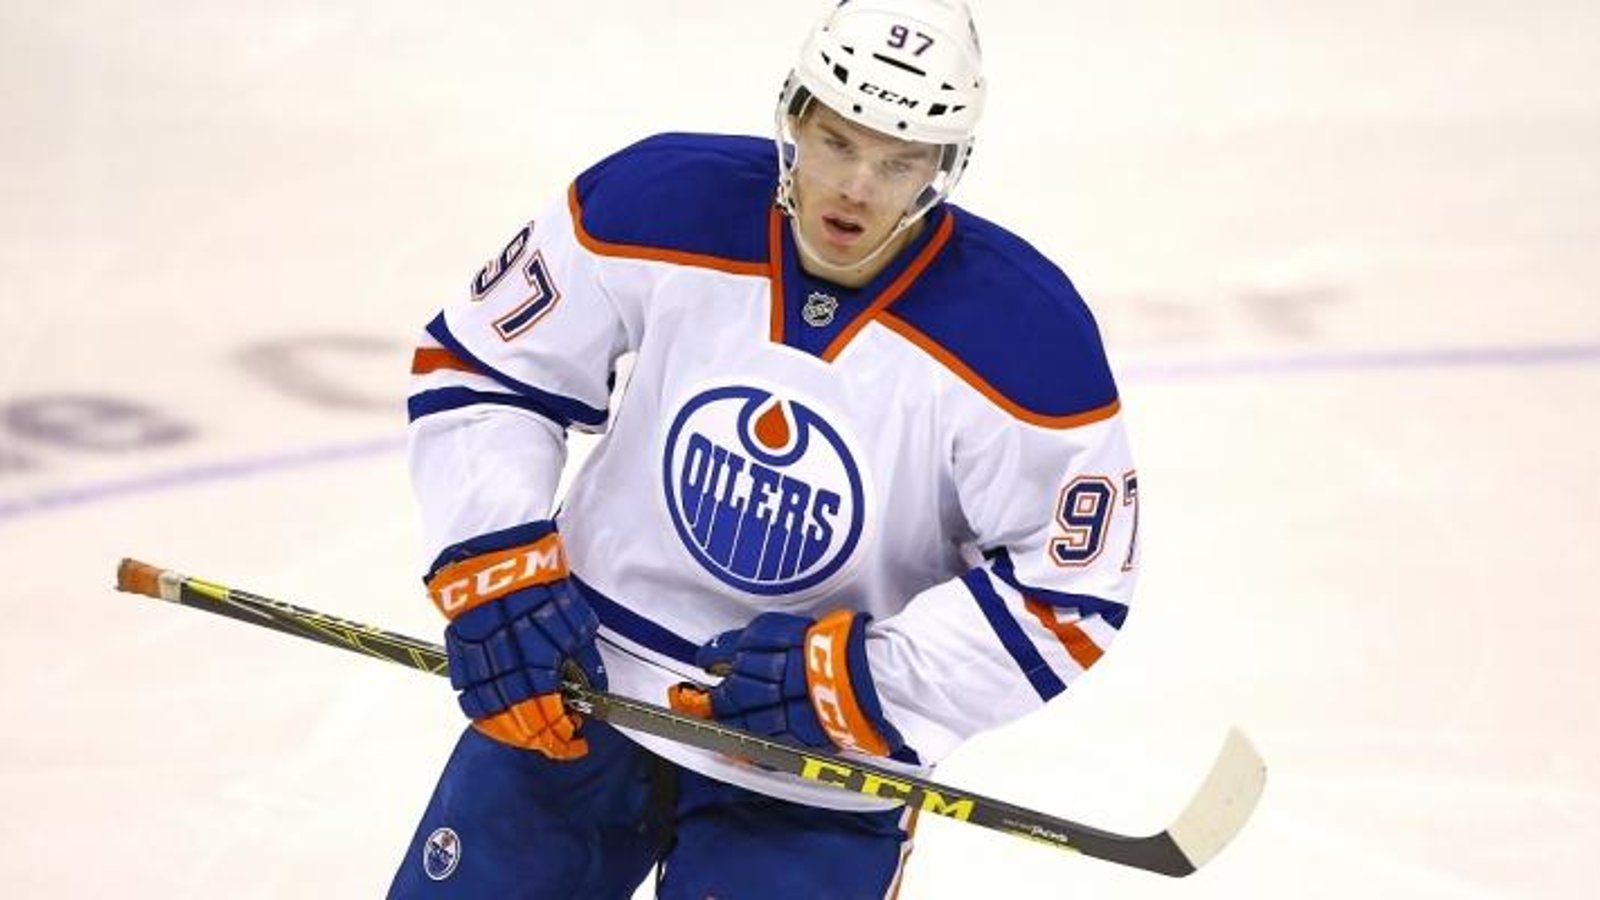 Some big news from rookie superstar Connor McDavid.